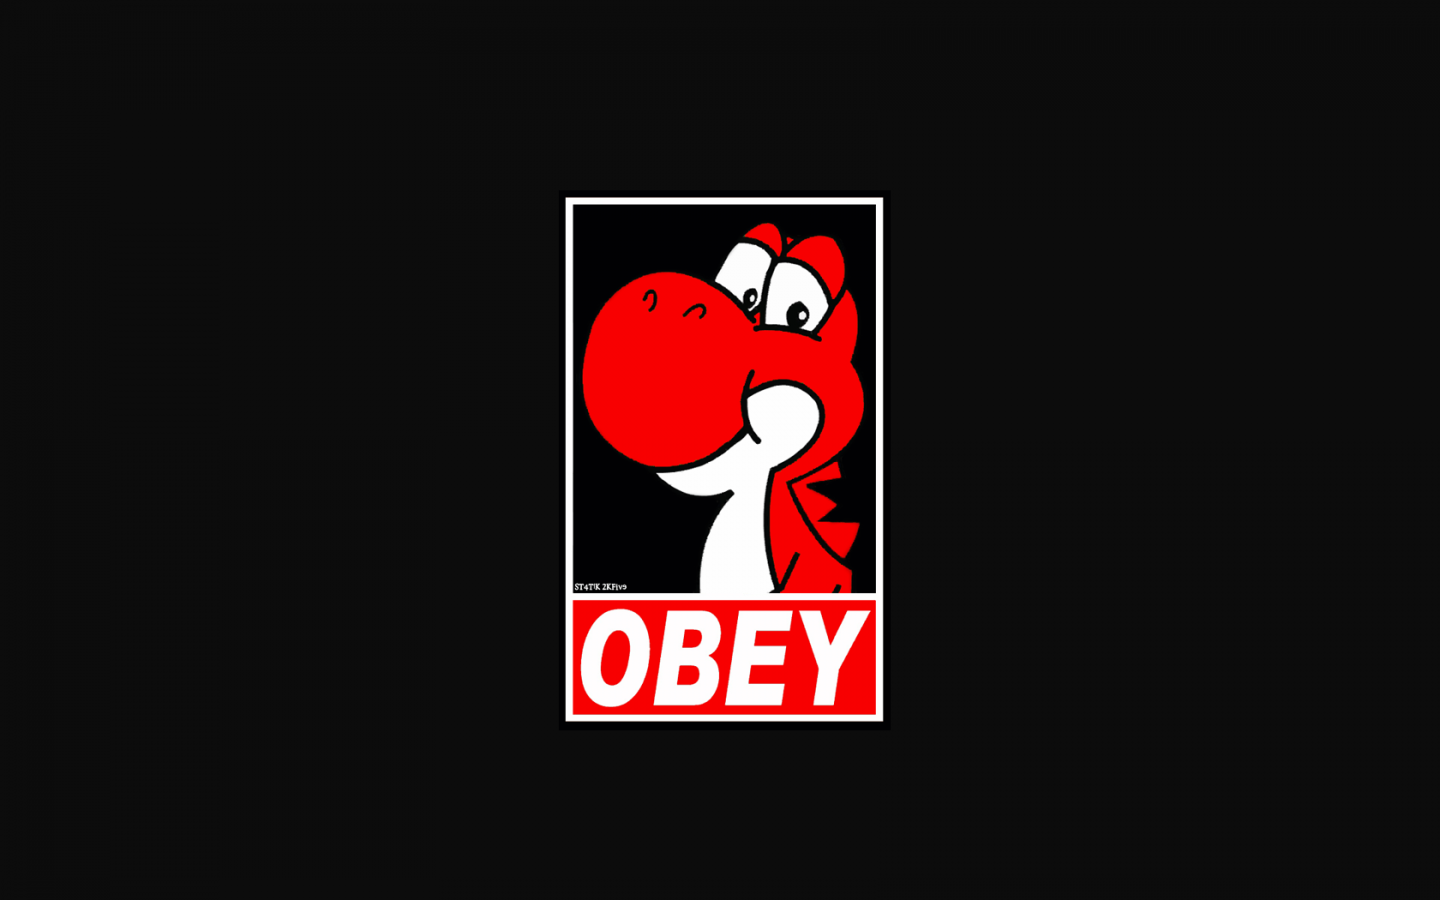 Obey Image Wallpaper